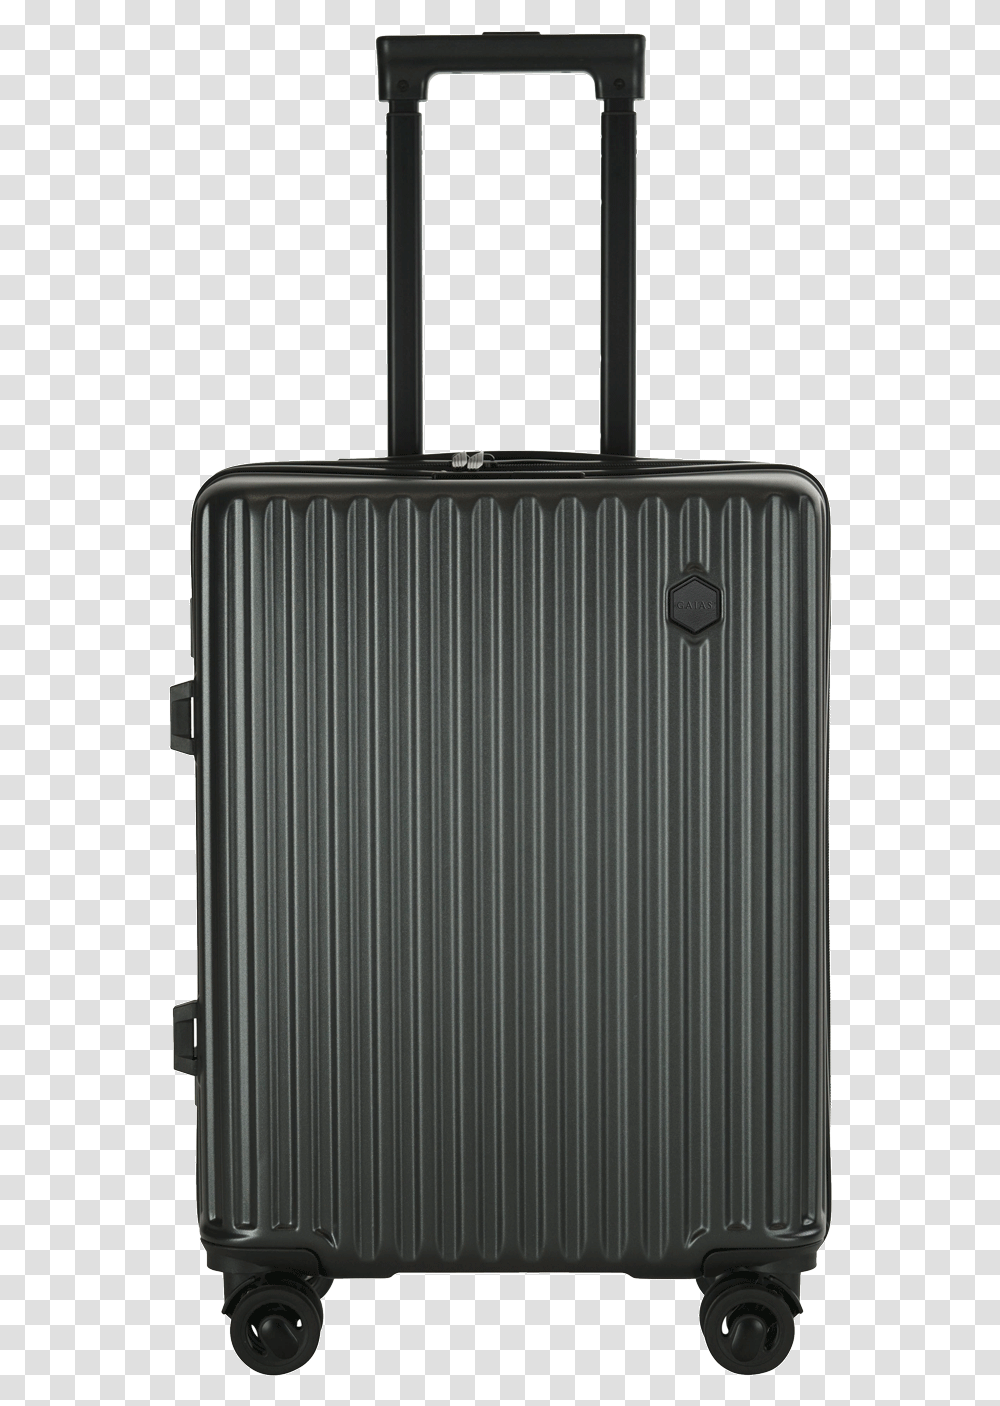 Luggage Suitcase Icon Free Suitcase Transparent Png